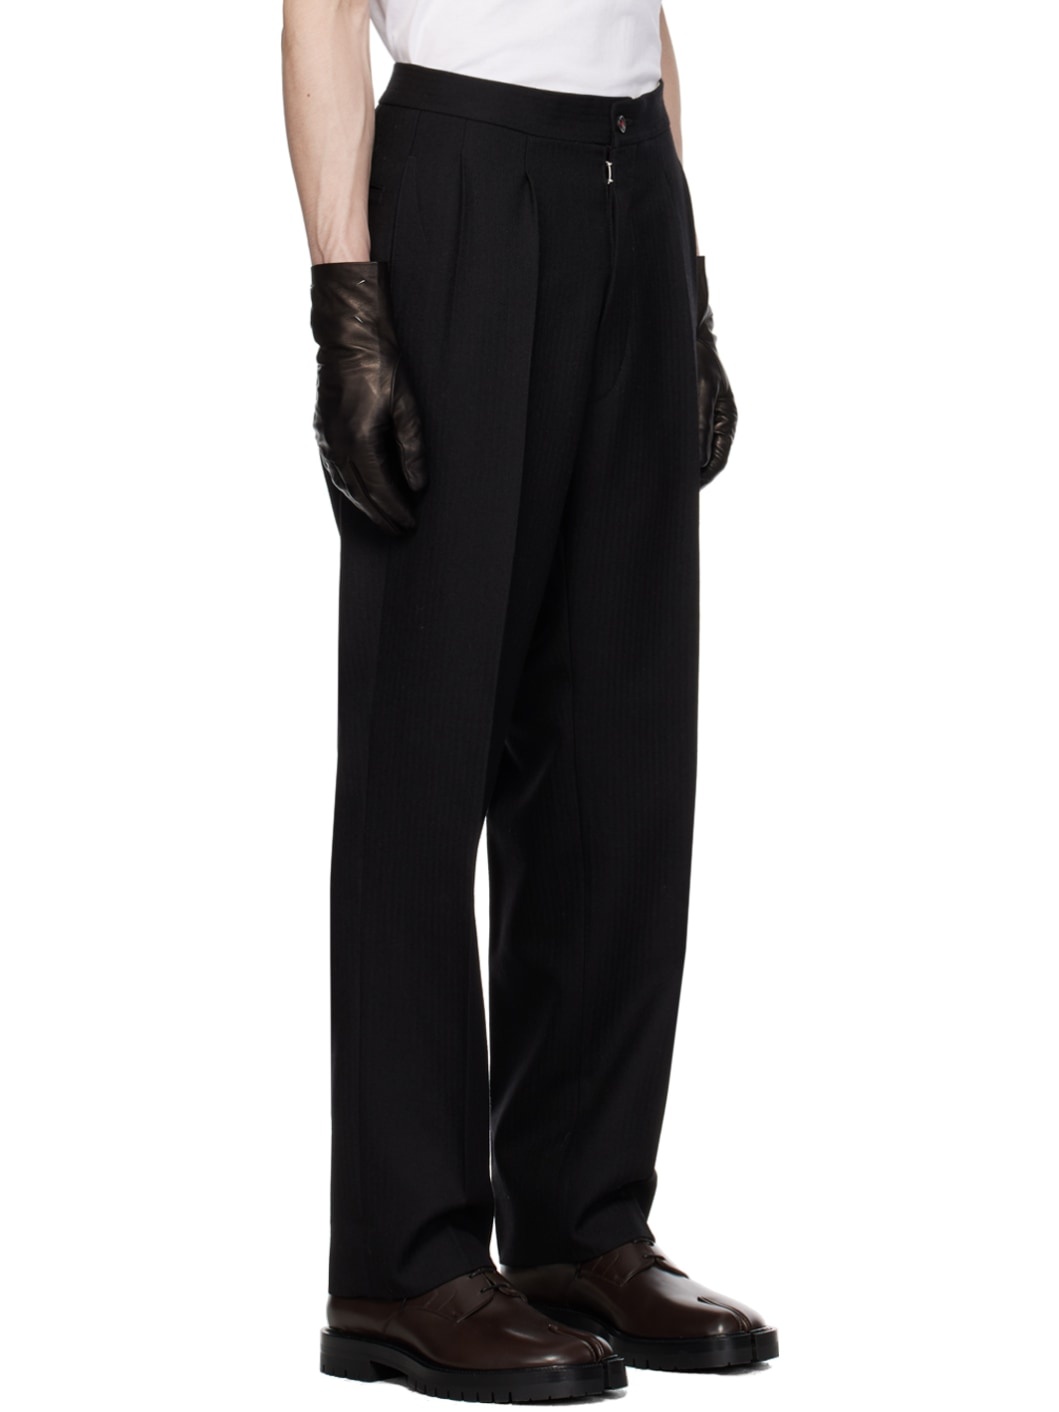 Black Pleated Trousers - 2